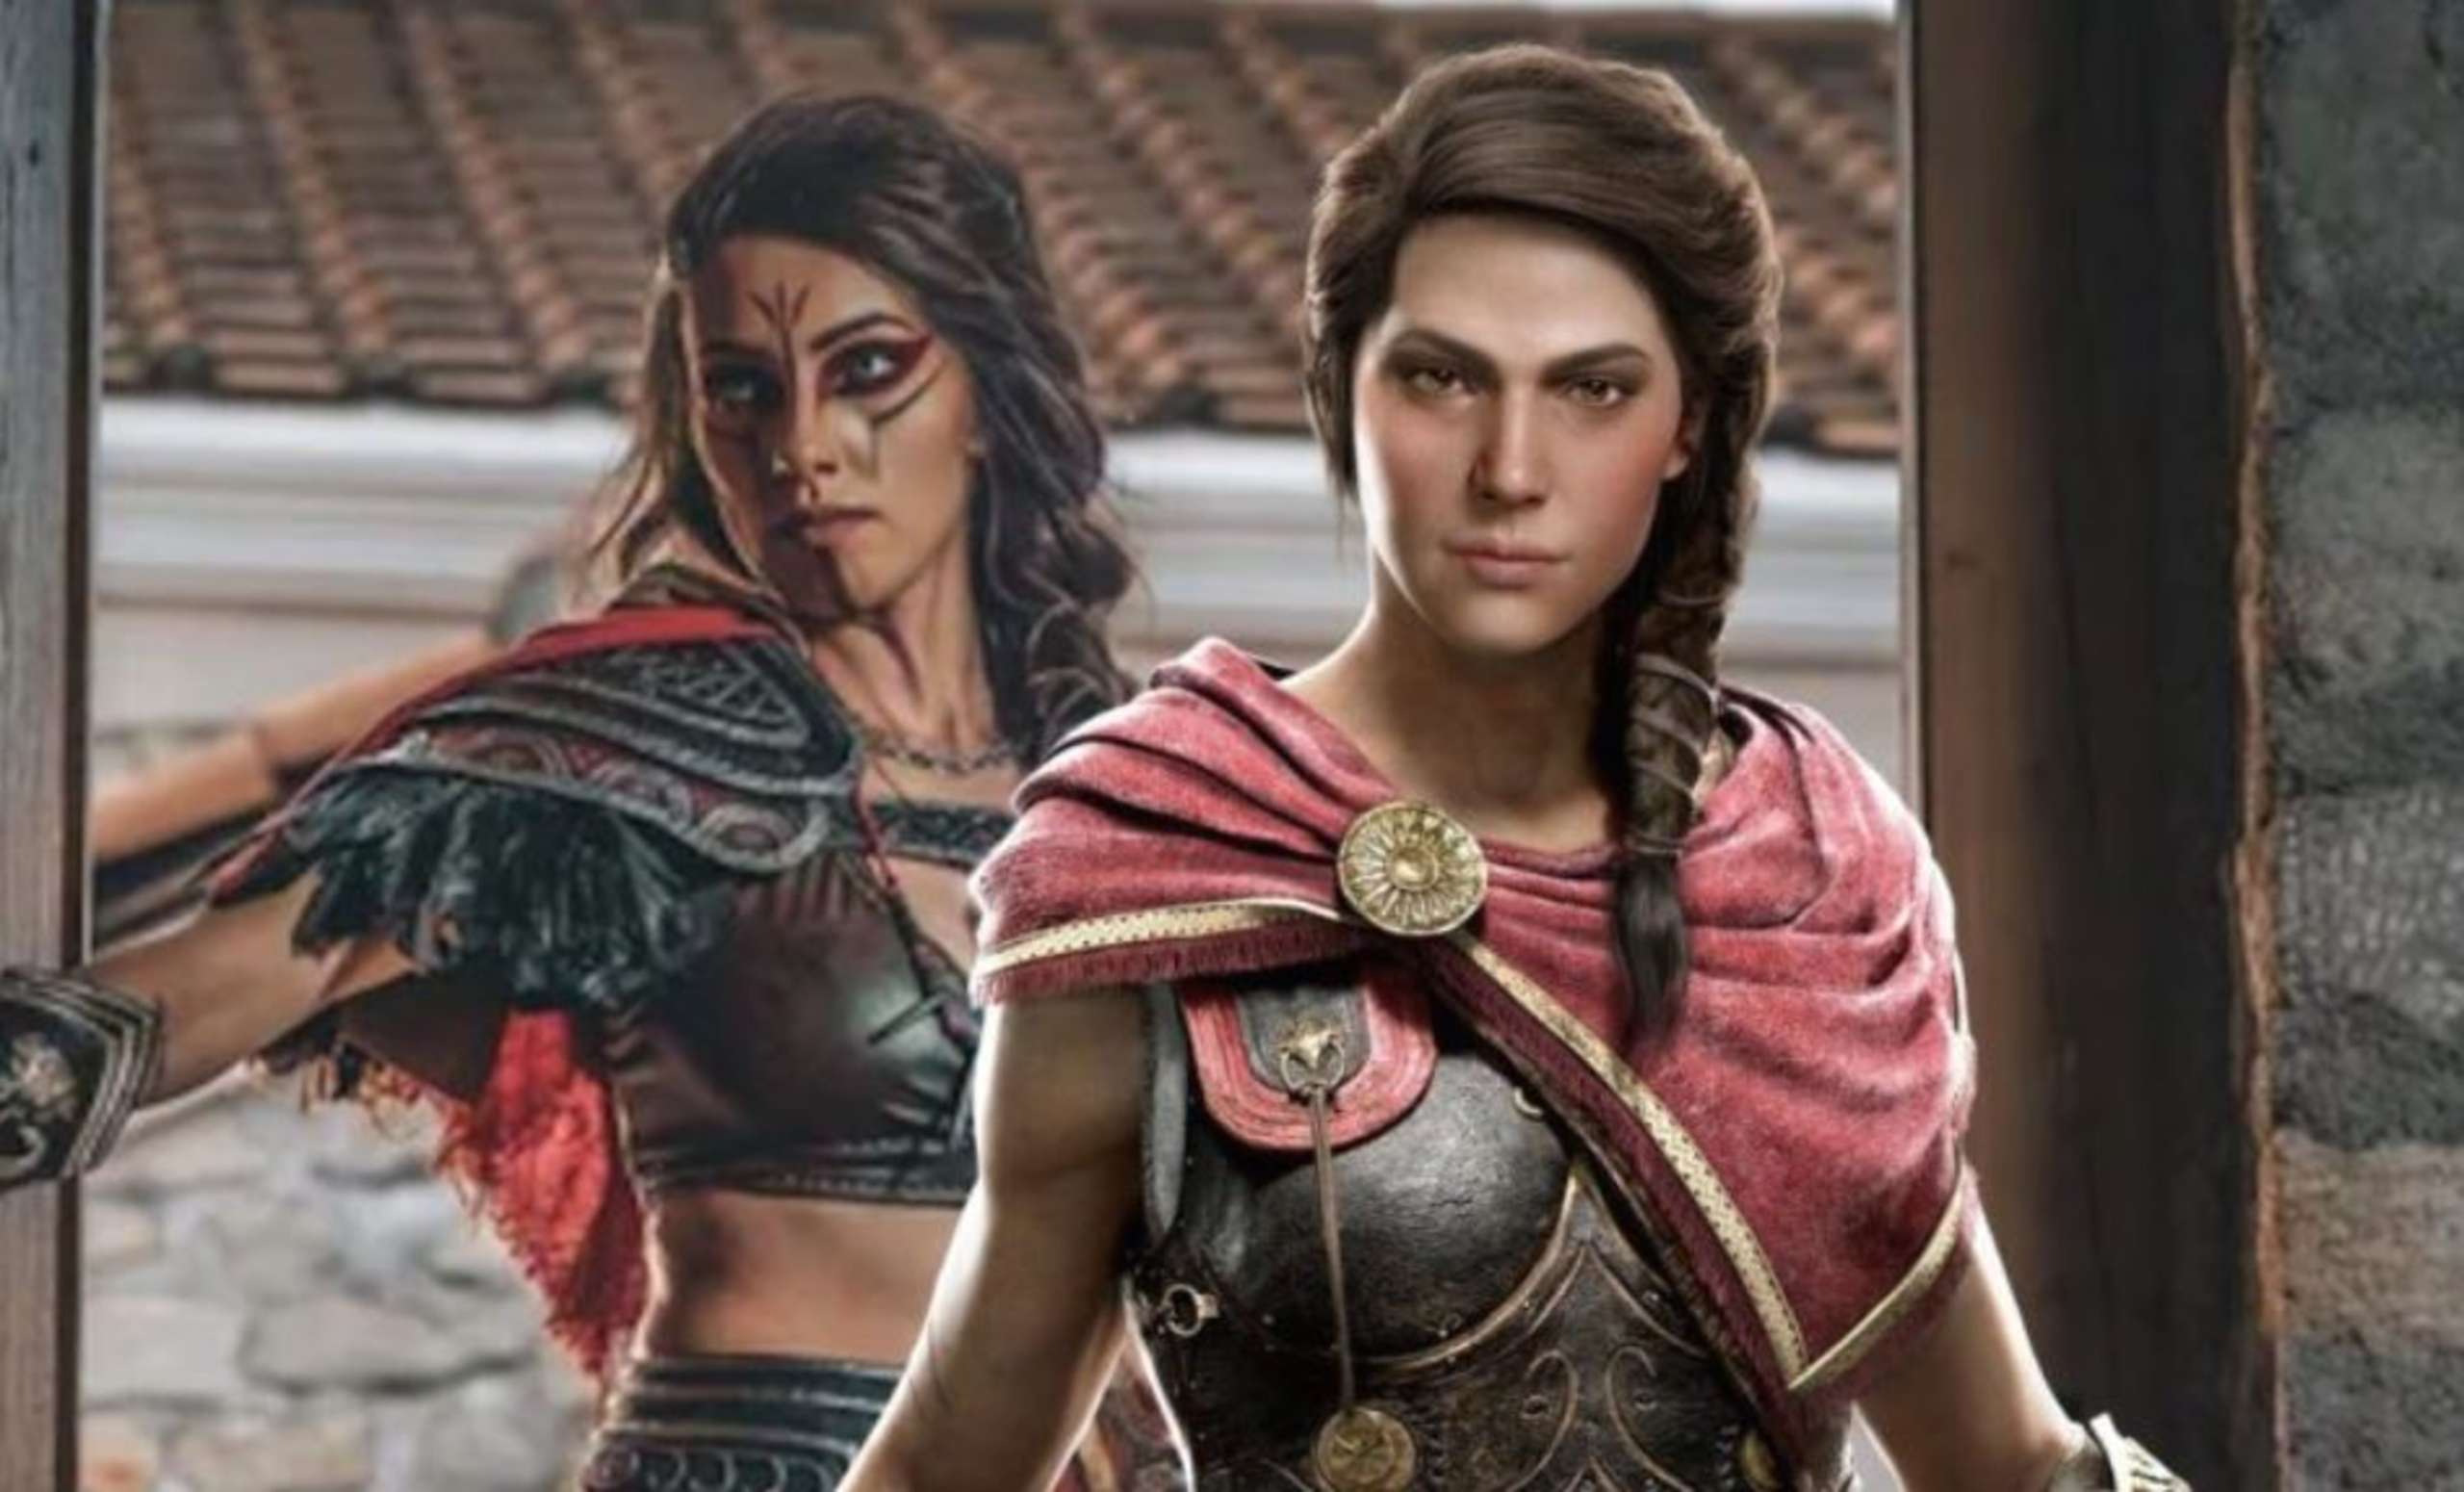 Udsigt sadel tømrer That Kassandra Costume From Assassin's Creed Odyssey Looks Fantastic. It  Captures The Essence Of The Spartan Warrior Down To The Face Paint And  Renegade Armor | Happy Gamer